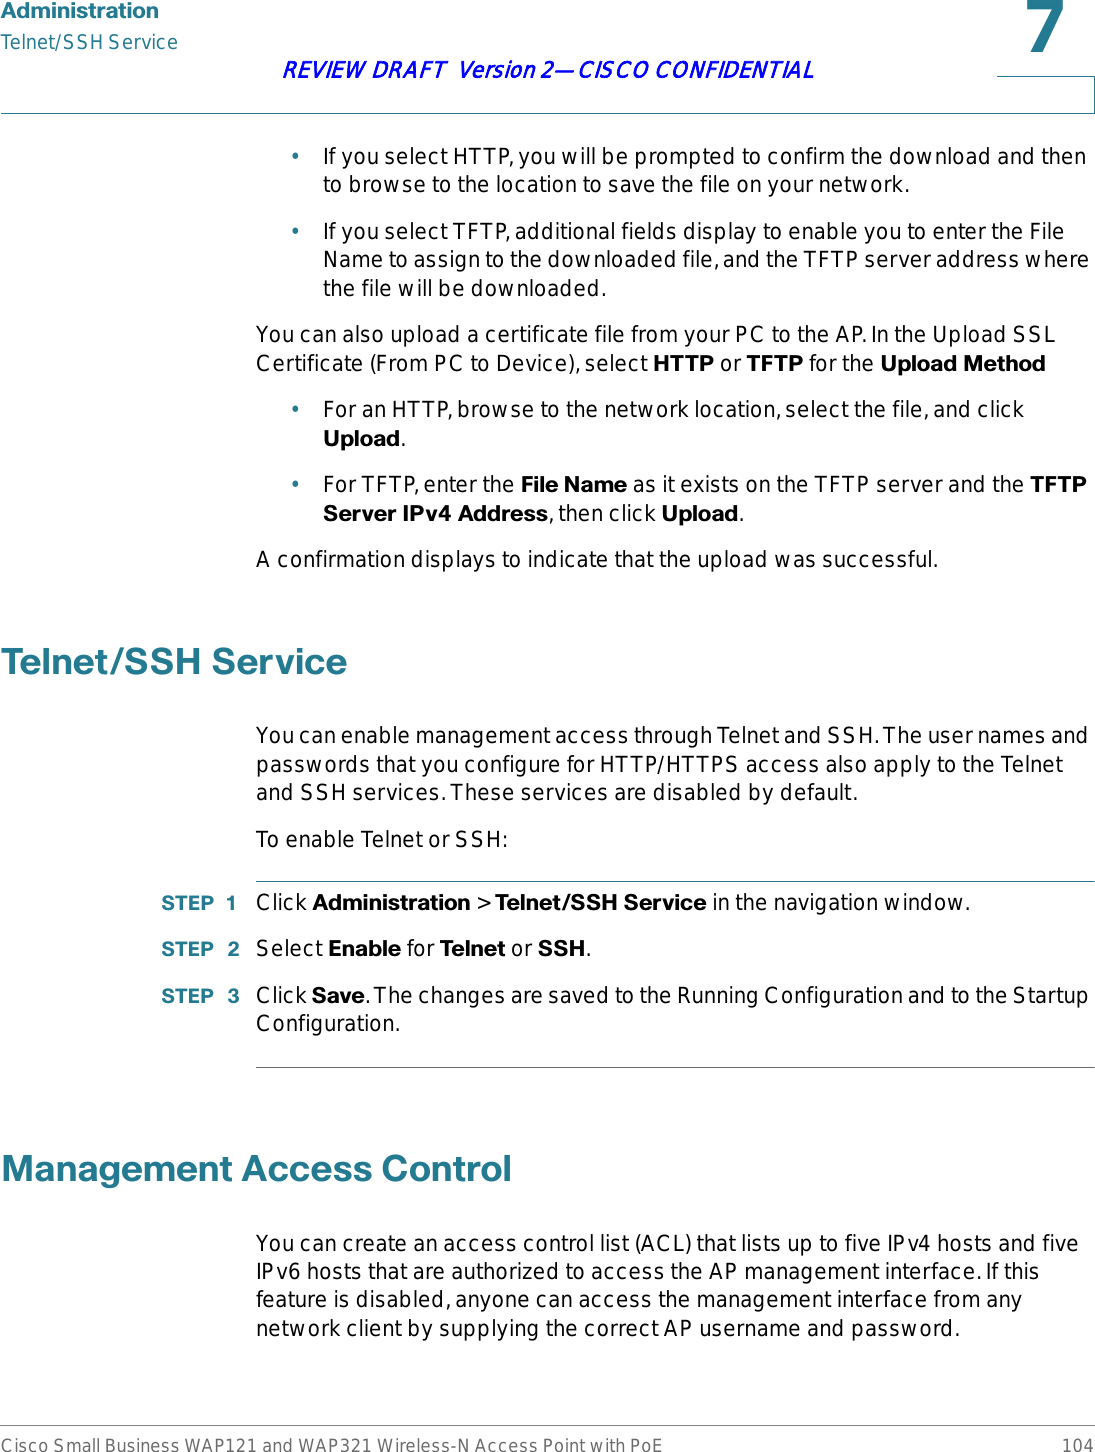 $GPLQLVWUDWLRQTelnet/SSH ServiceCisco Small Business WAP121 and WAP321 Wireless-N Access Point with PoE 104REVIEW DRAFT  Version 2—CISCO CONFIDENTIAL•If you select HTTP, you will be prompted to confirm the download and then to browse to the location to save the file on your network.•If you select TFTP, additional fields display to enable you to enter the File Name to assign to the downloaded file, and the TFTP server address where the file will be downloaded.You can also upload a certificate file from your PC to the AP. In the Upload SSL Certificate (From PC to Device), select +773 or 7)73 for the 8SORDG0HWKRG•For an HTTP, browse to the network location, select the file, and click 8SORDG.•For TFTP, enter the )LOH1DPH as it exists on the TFTP server and the 7)736HUYHU,3Y$GGUHVV, then click 8SORDG.A confirmation displays to indicate that the upload was successful.7HOQHW66+6HUYLFHYou can enable management access through Telnet and SSH. The user names and passwords that you configure for HTTP/HTTPS access also apply to the Telnet and SSH services. These services are disabled by default.To enable Telnet or SSH:67(3  Click $GPLQLVWUDWLRQ &gt; 7HOQHW66+6HUYLFH in the navigation window.67(3  Select (QDEOH for 7HOQHWor 66+.67(3  Click 6DYH. The changes are saved to the Running Configuration and to the Startup Configuration.0DQDJHPHQW$FFHVV&amp;RQWUROYou can create an access control list (ACL) that lists up to five IPv4 hosts and five IPv6 hosts that are authorized to access the AP management interface. If this feature is disabled, anyone can access the management interface from any network client by supplying the correct AP username and password.